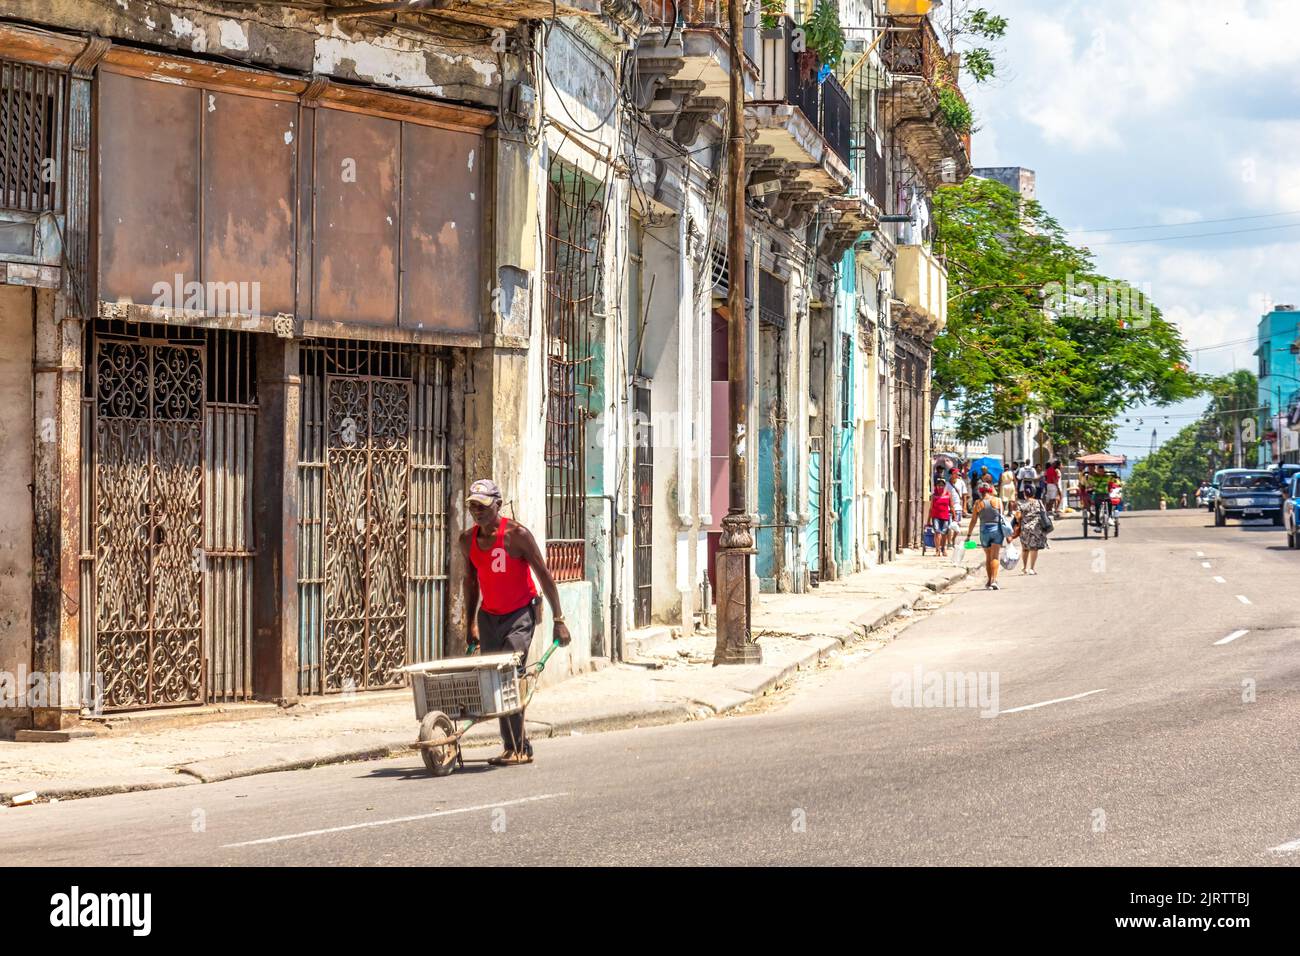 A Cuban afro-caribbean man pushes a wheelbarrow in a city street. He is passing by old, run-down, and weathered buildings Stock Photo